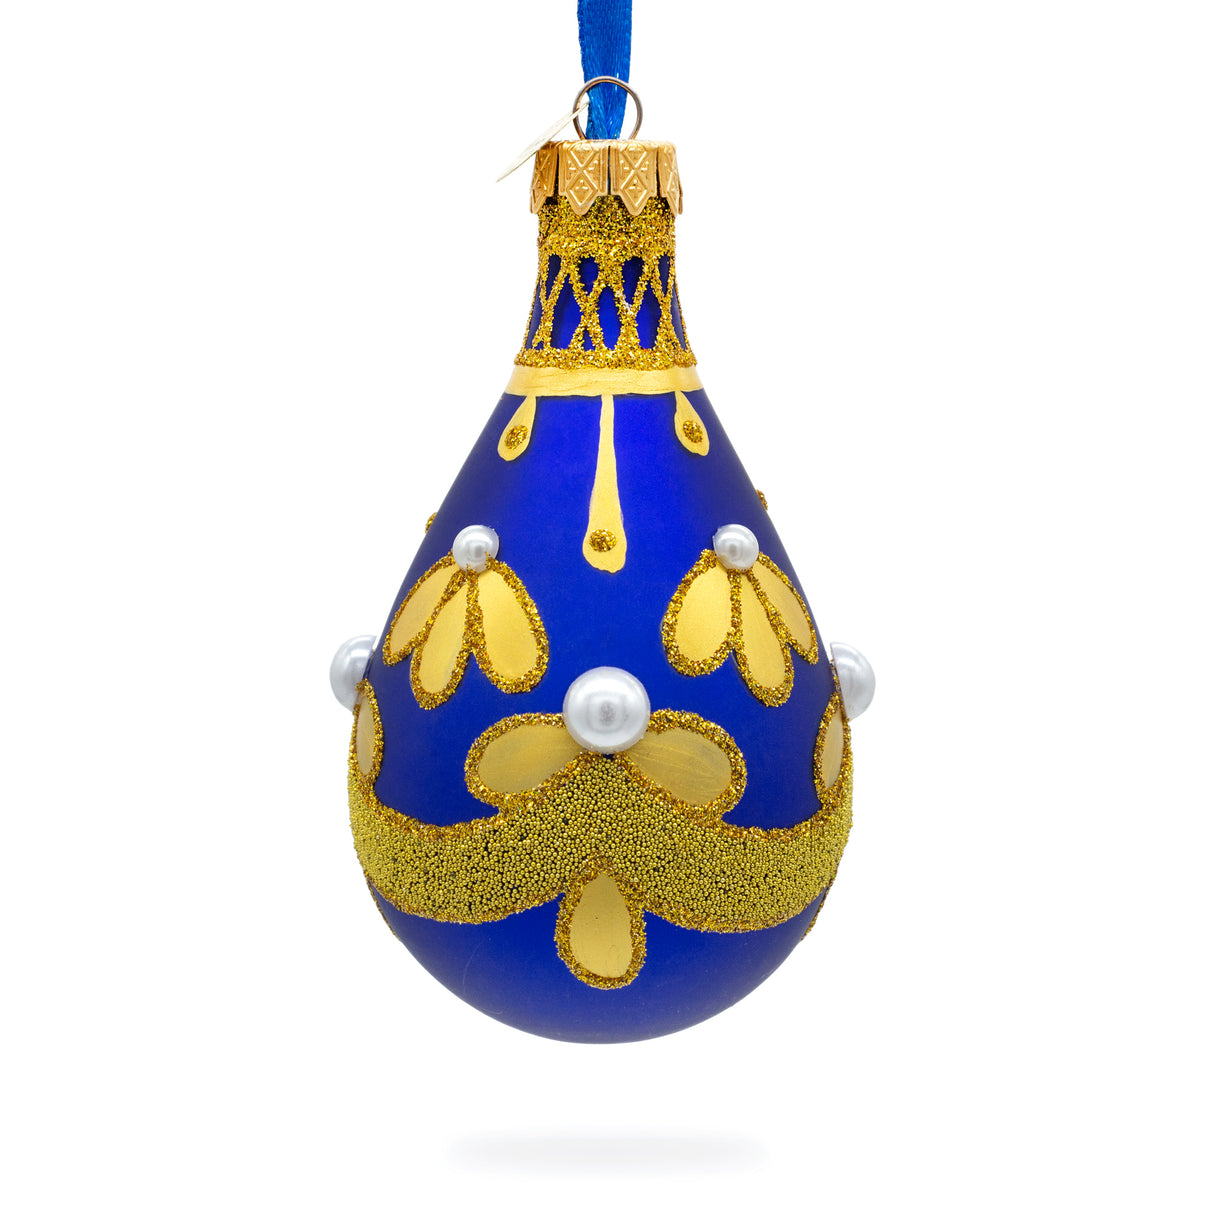 Gold Pattern on Blue Waterdrop Finial Glass Christmas Ornament in Blue color,  shape